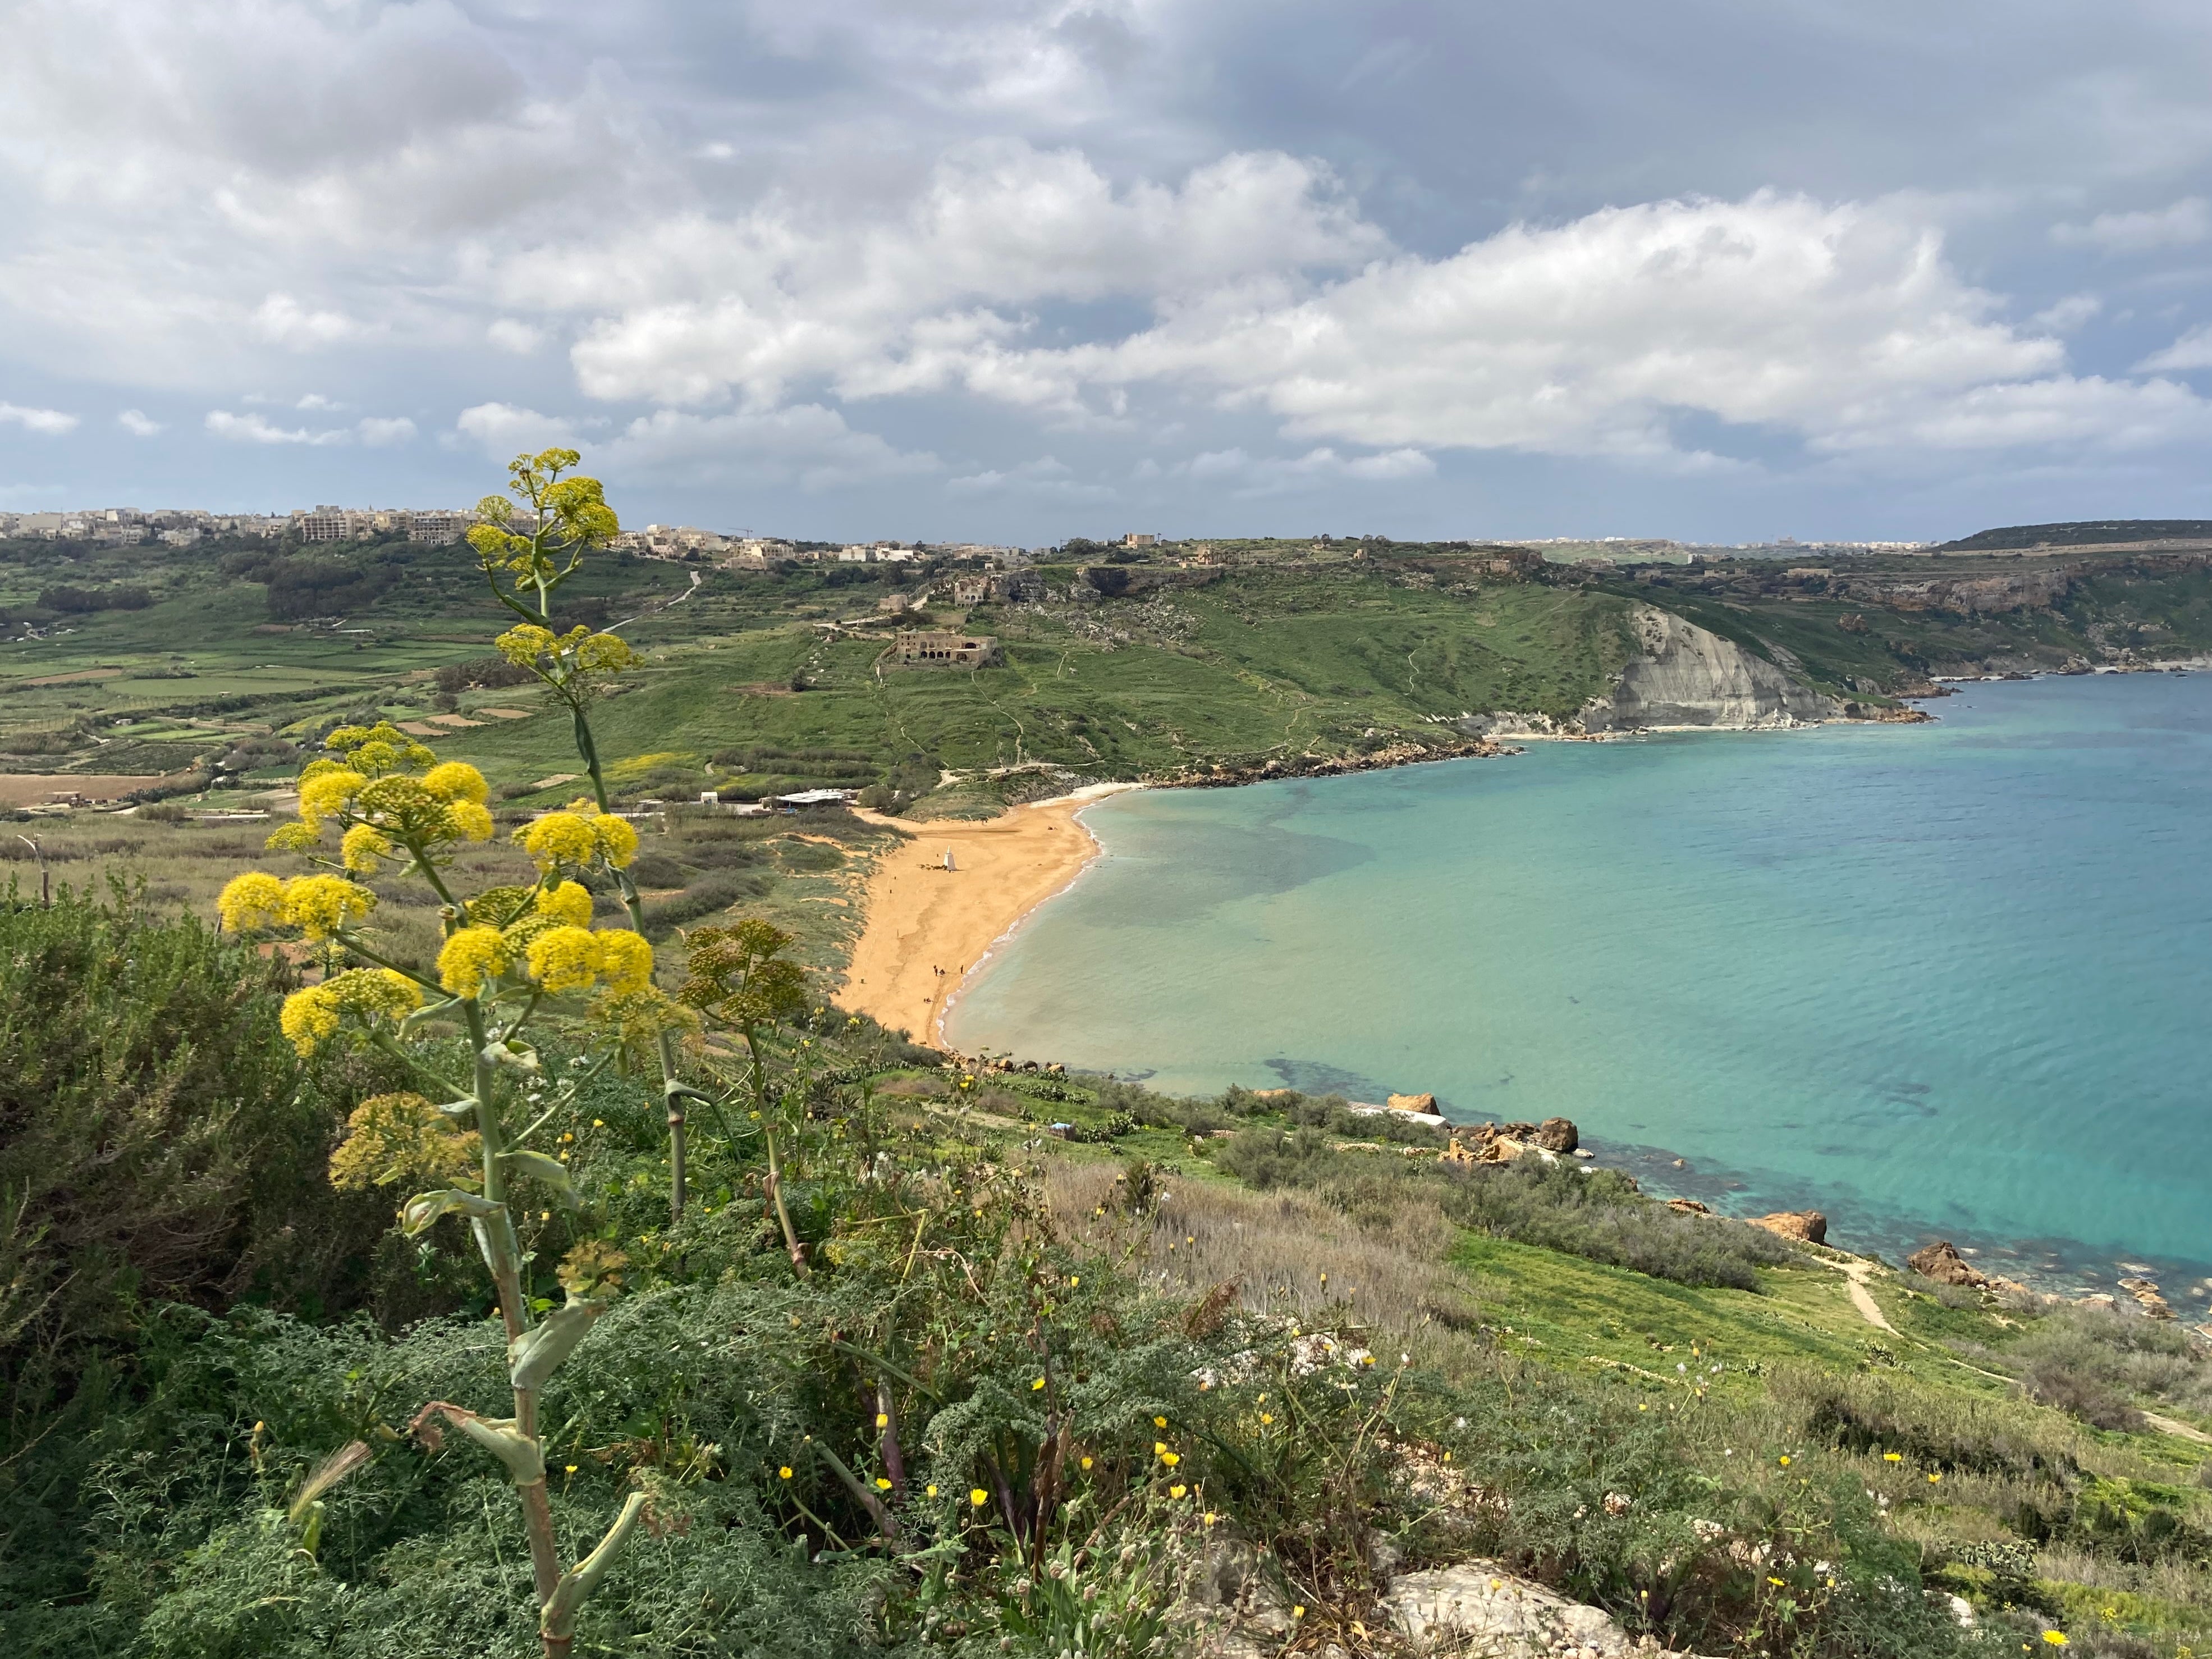 Green Gozo: The island is aiming to be carbon neutral by 2030